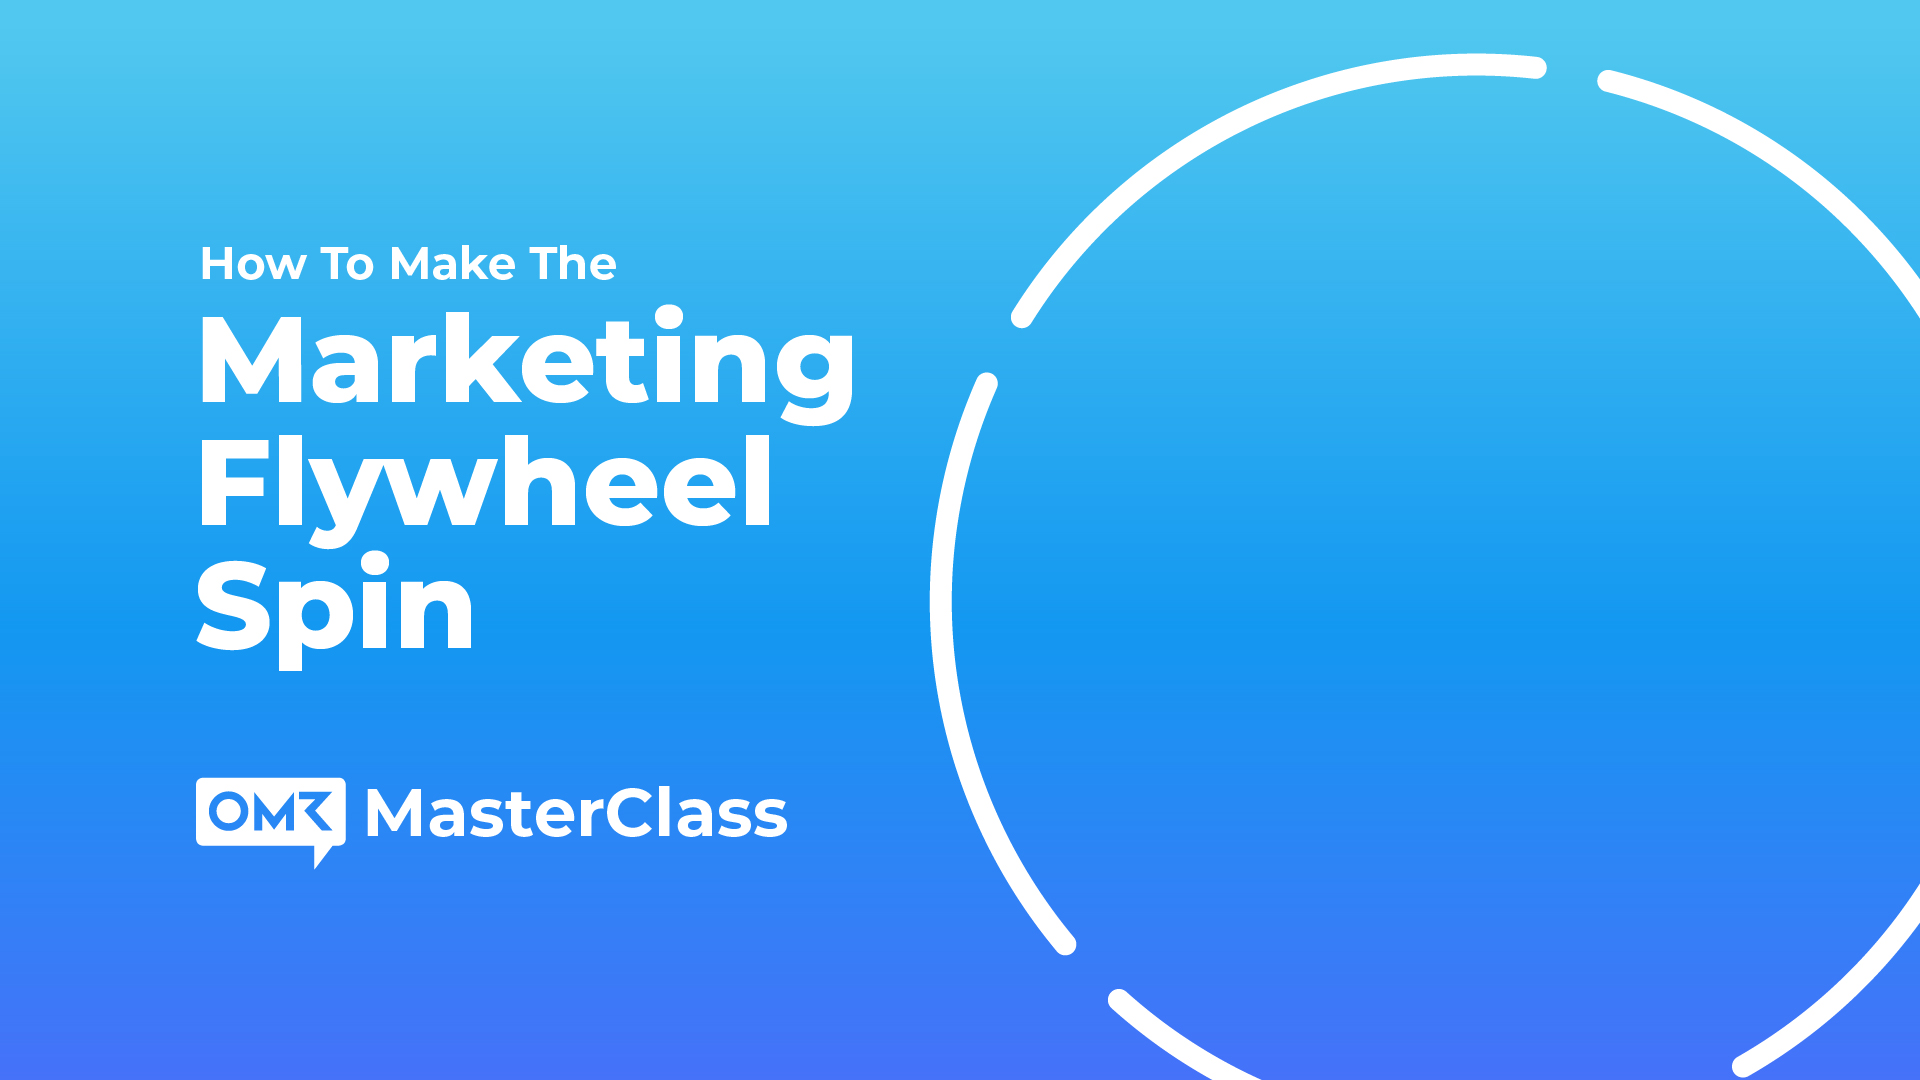 How To Make The Marketing Flywheel Spin – OMR Masterclass